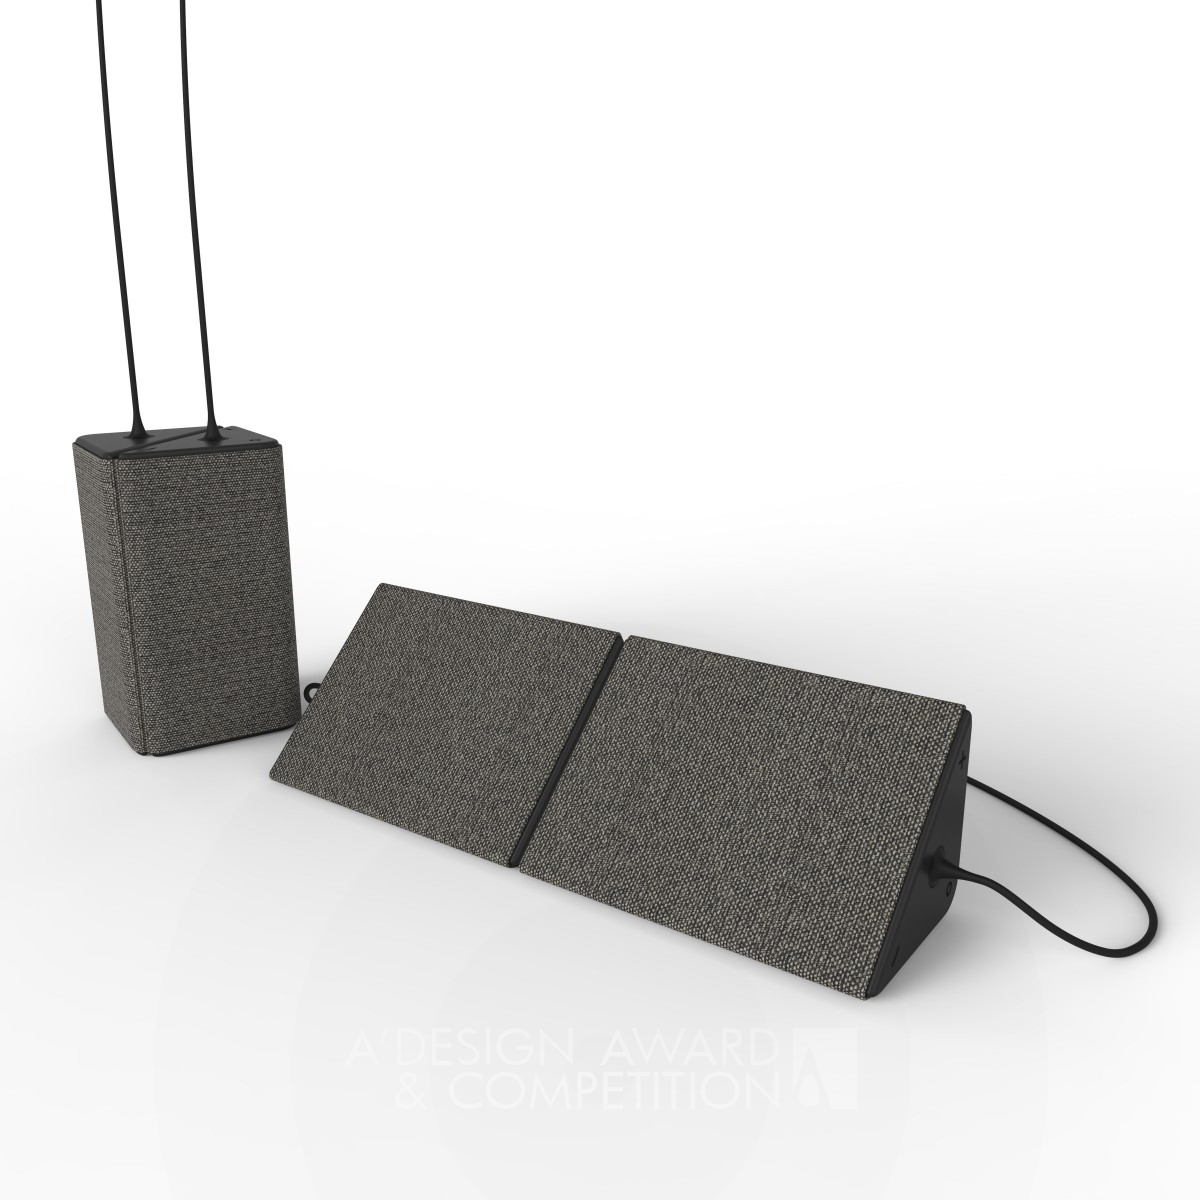 Sling Portable speaker by Kyung il Chung